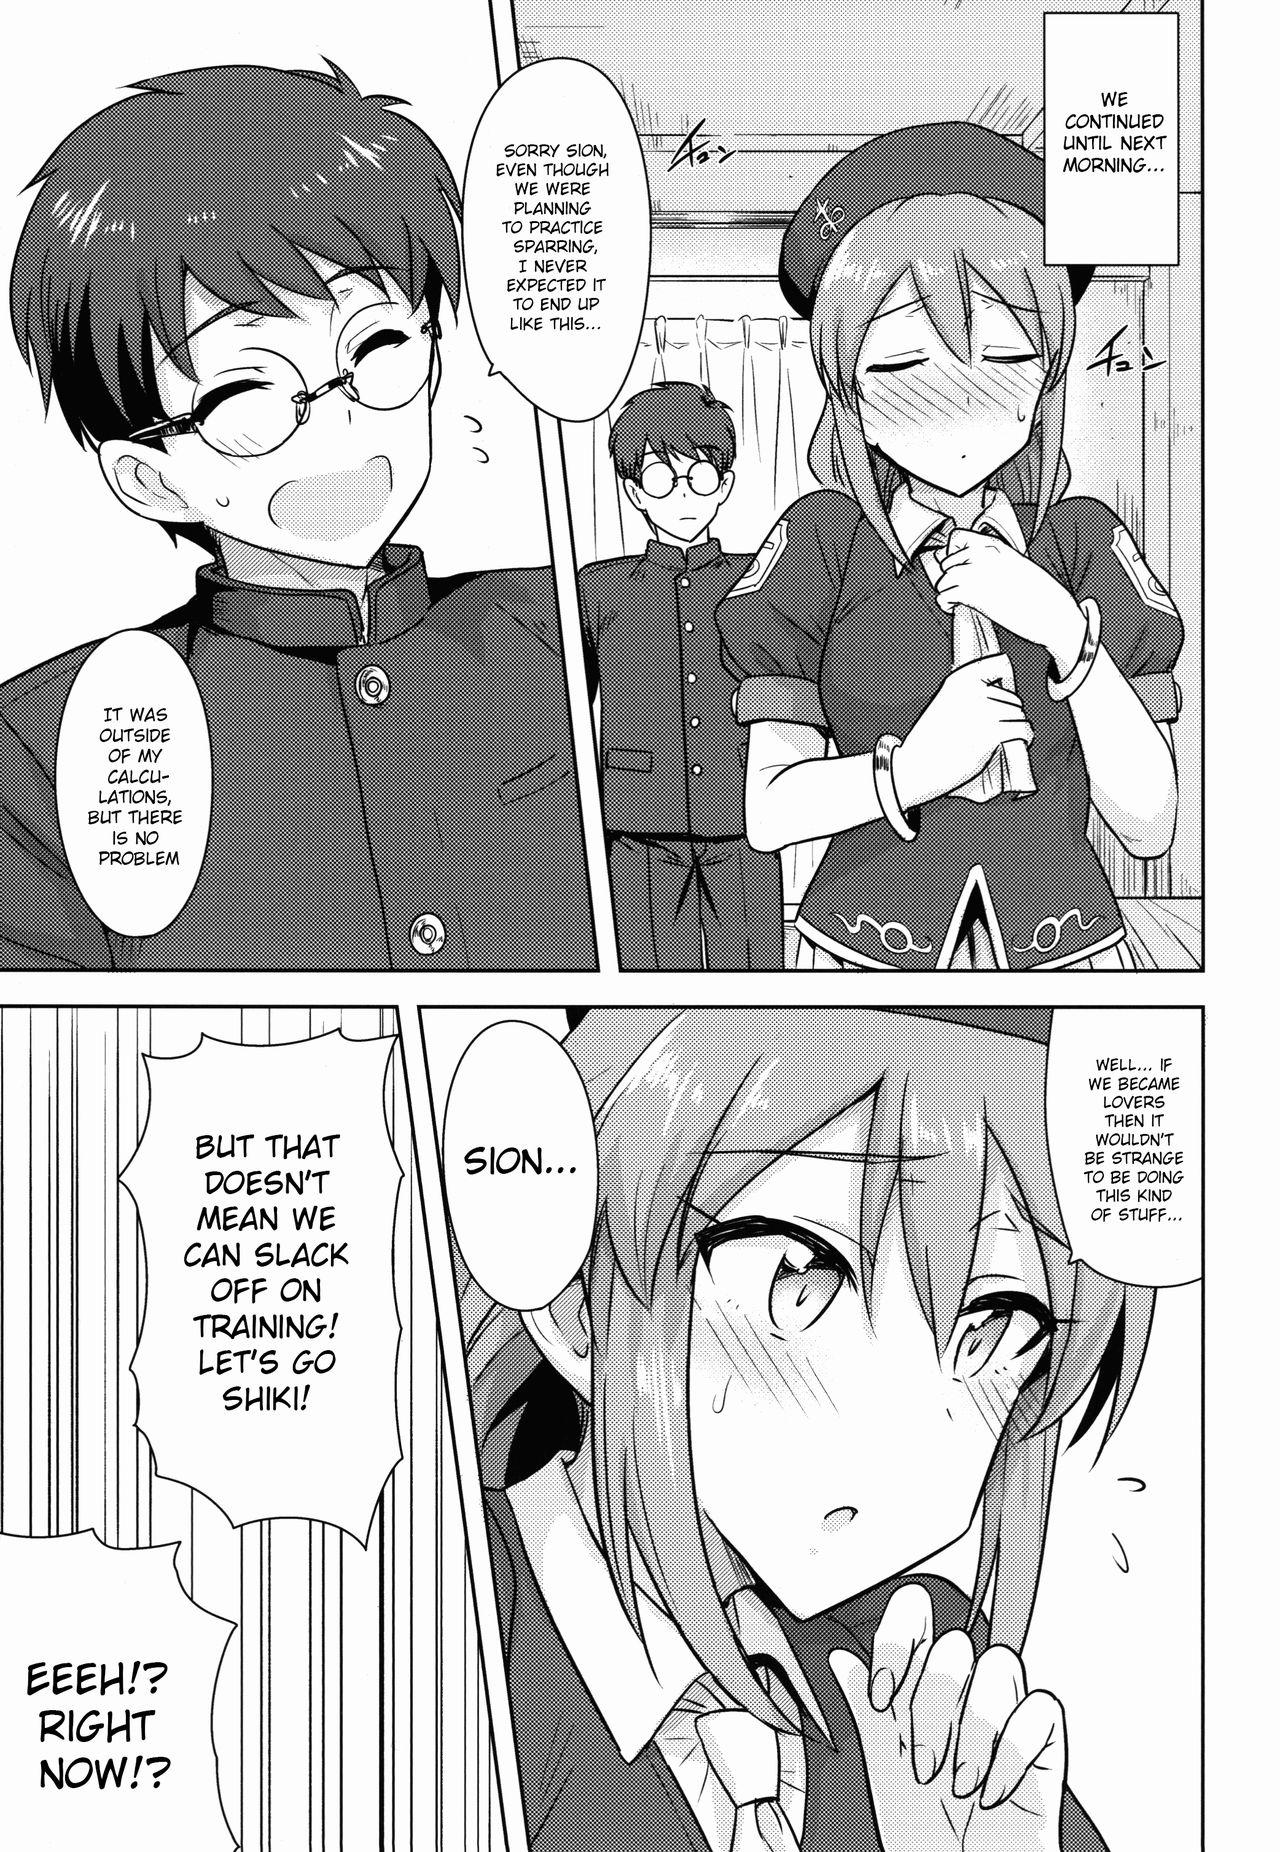 Plump Aru Hi no Futari MelBlo Hen | A Certain Day with Each Other Melty Blood Hen - Tsukihime Masturbating - Page 8